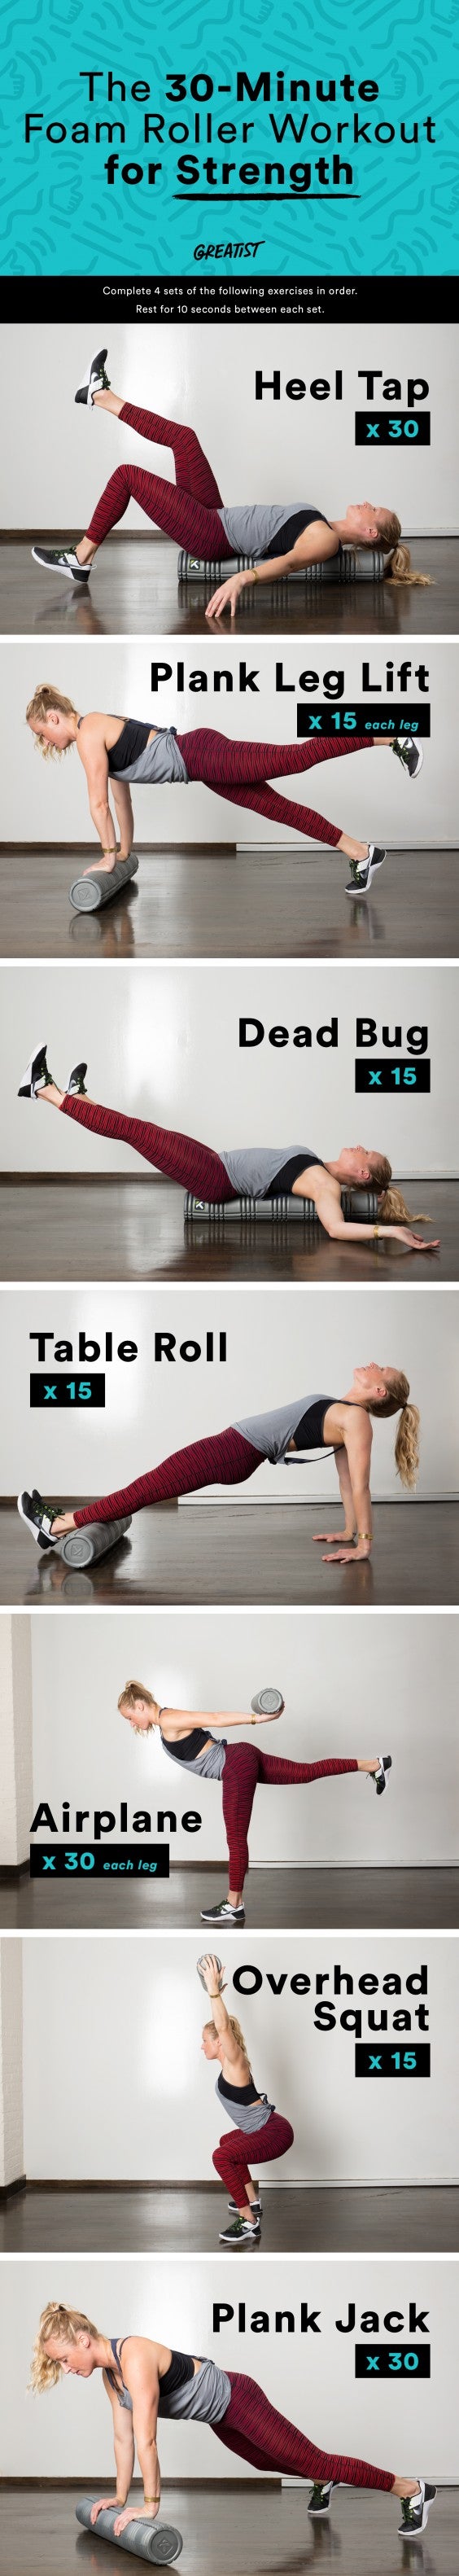 roller for working out